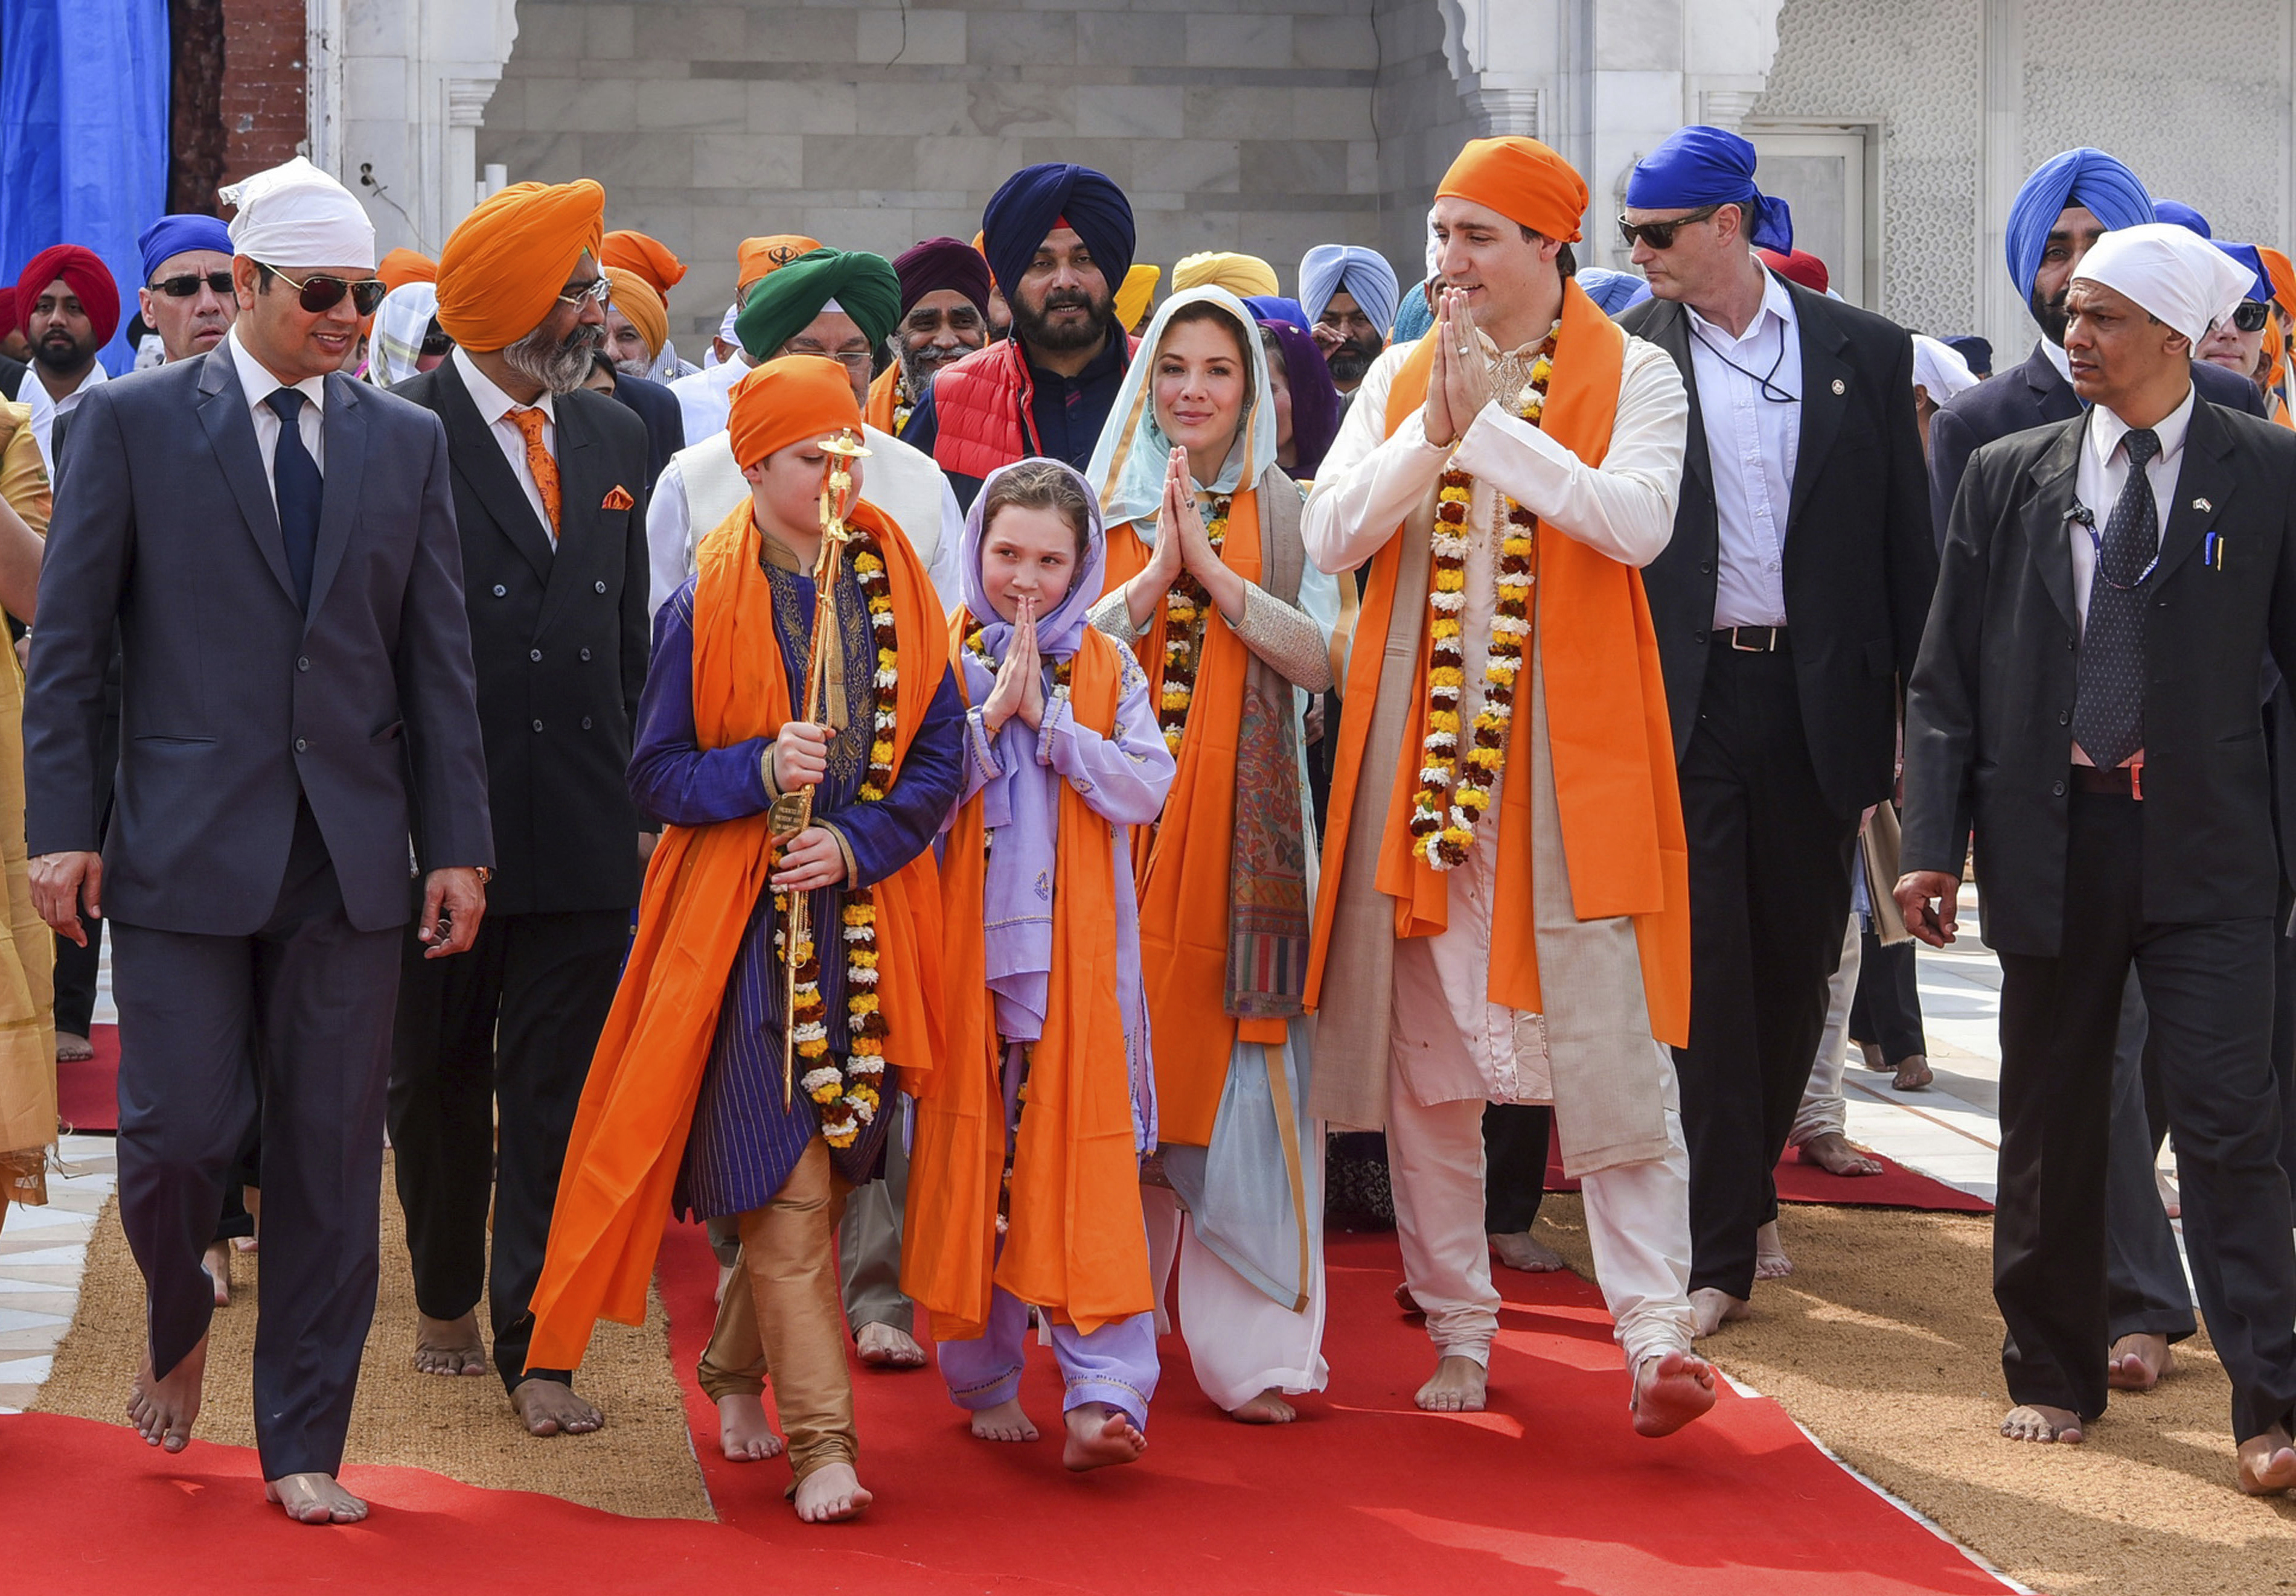 Canadian PM Justin Trudeau ridiculed by Indians for his 'fake, tacky and  annoying' wardrobe - NZ Herald